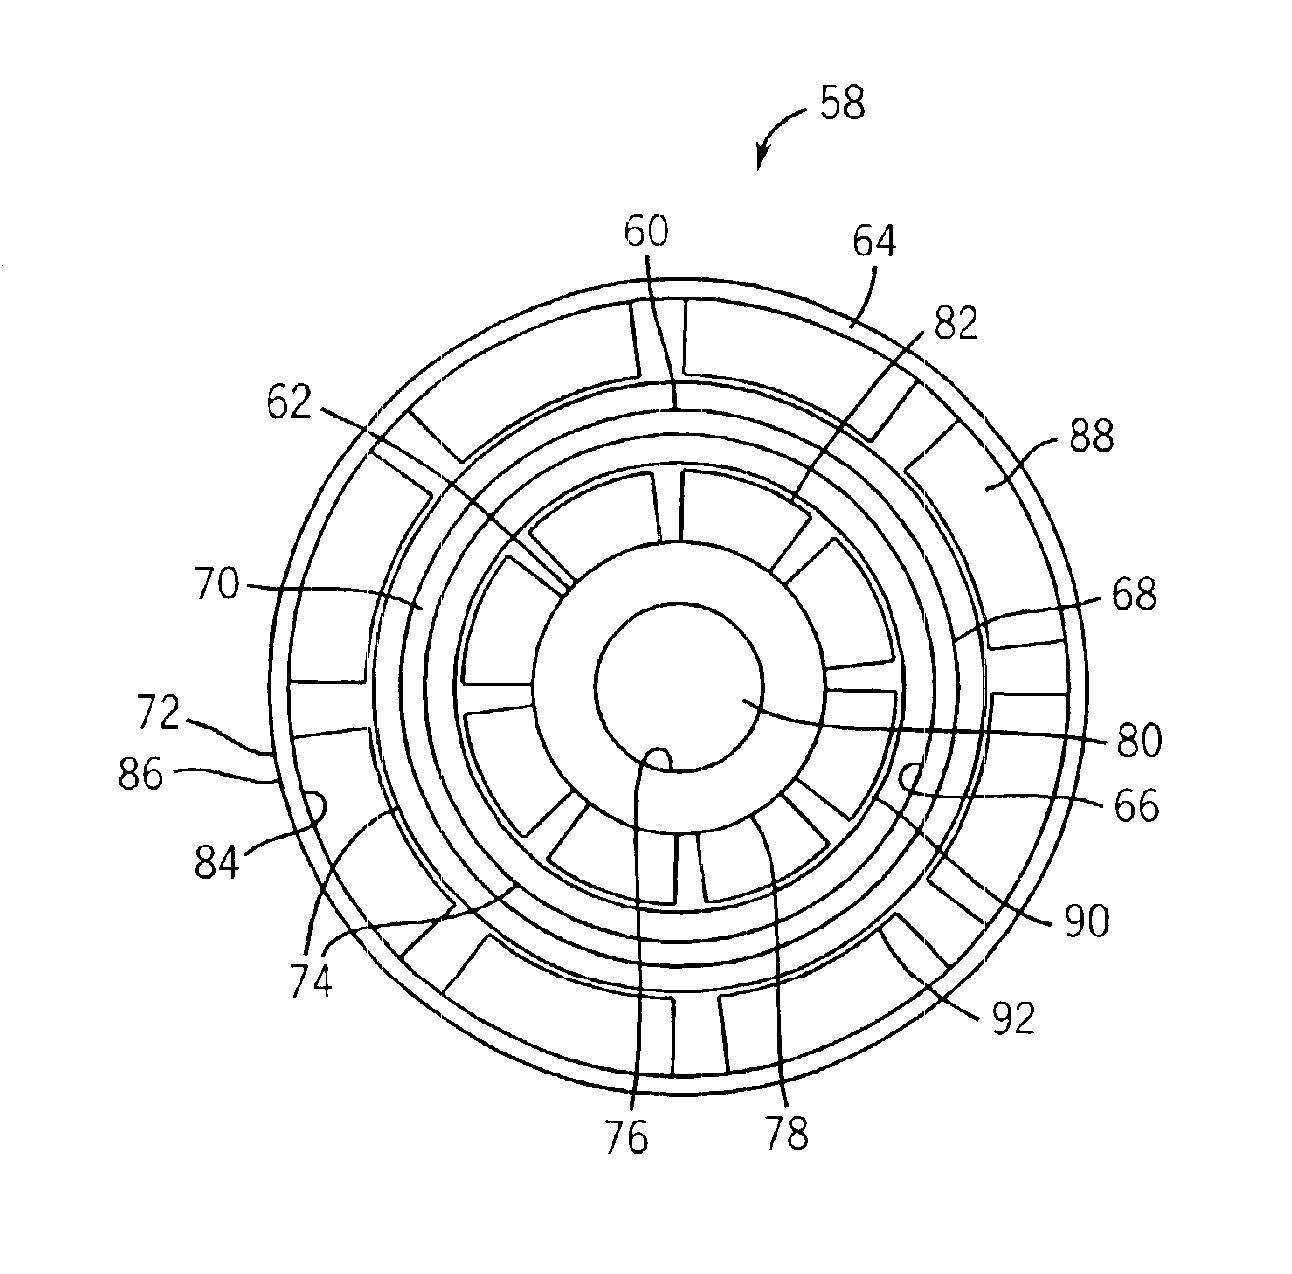 Dual-rotor, radial-flux, toroidally-wound, permanent-magnet machine